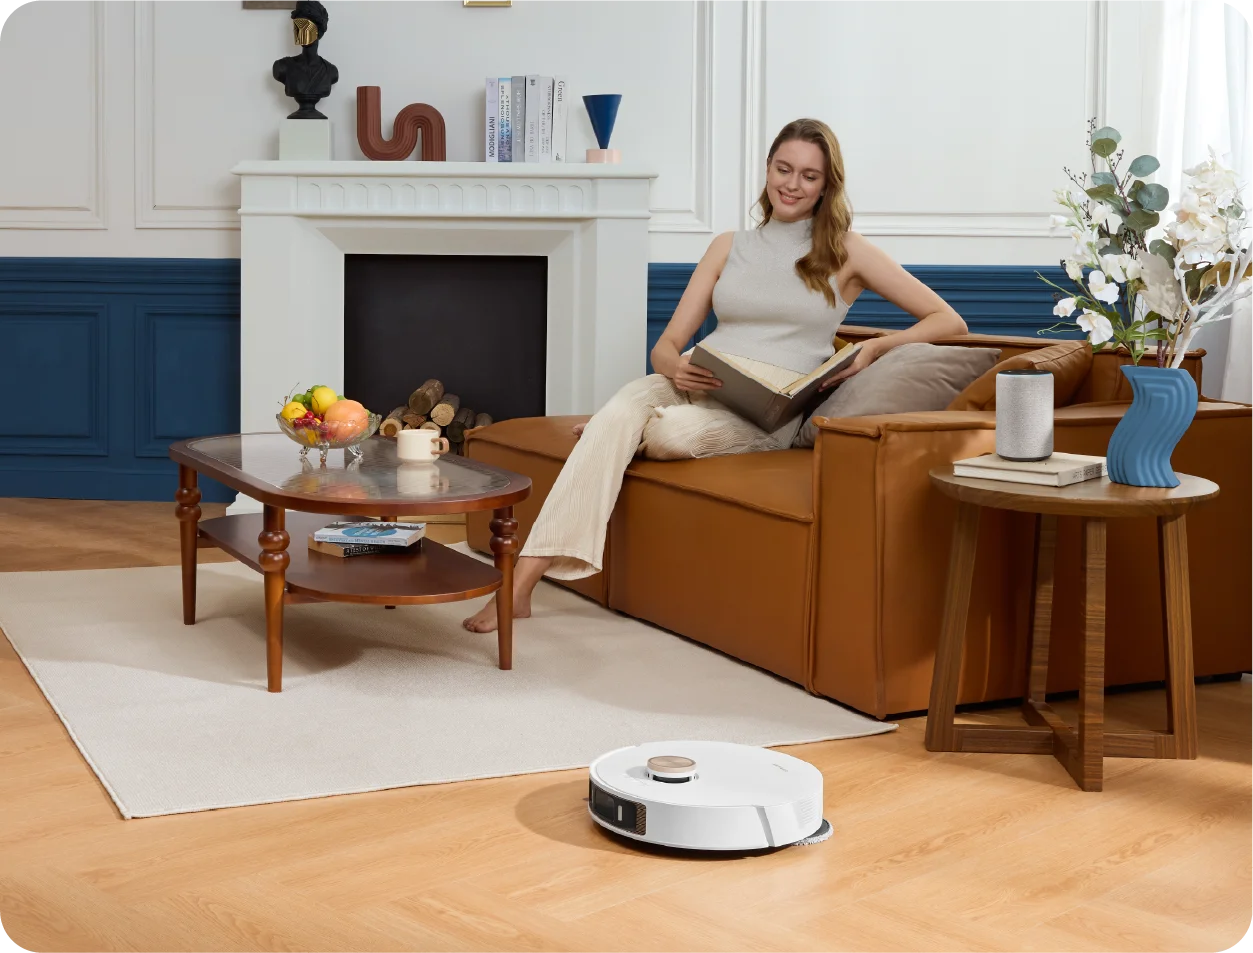 The Dreame L20 Robot Vacuum is insanely smart and aesthetic